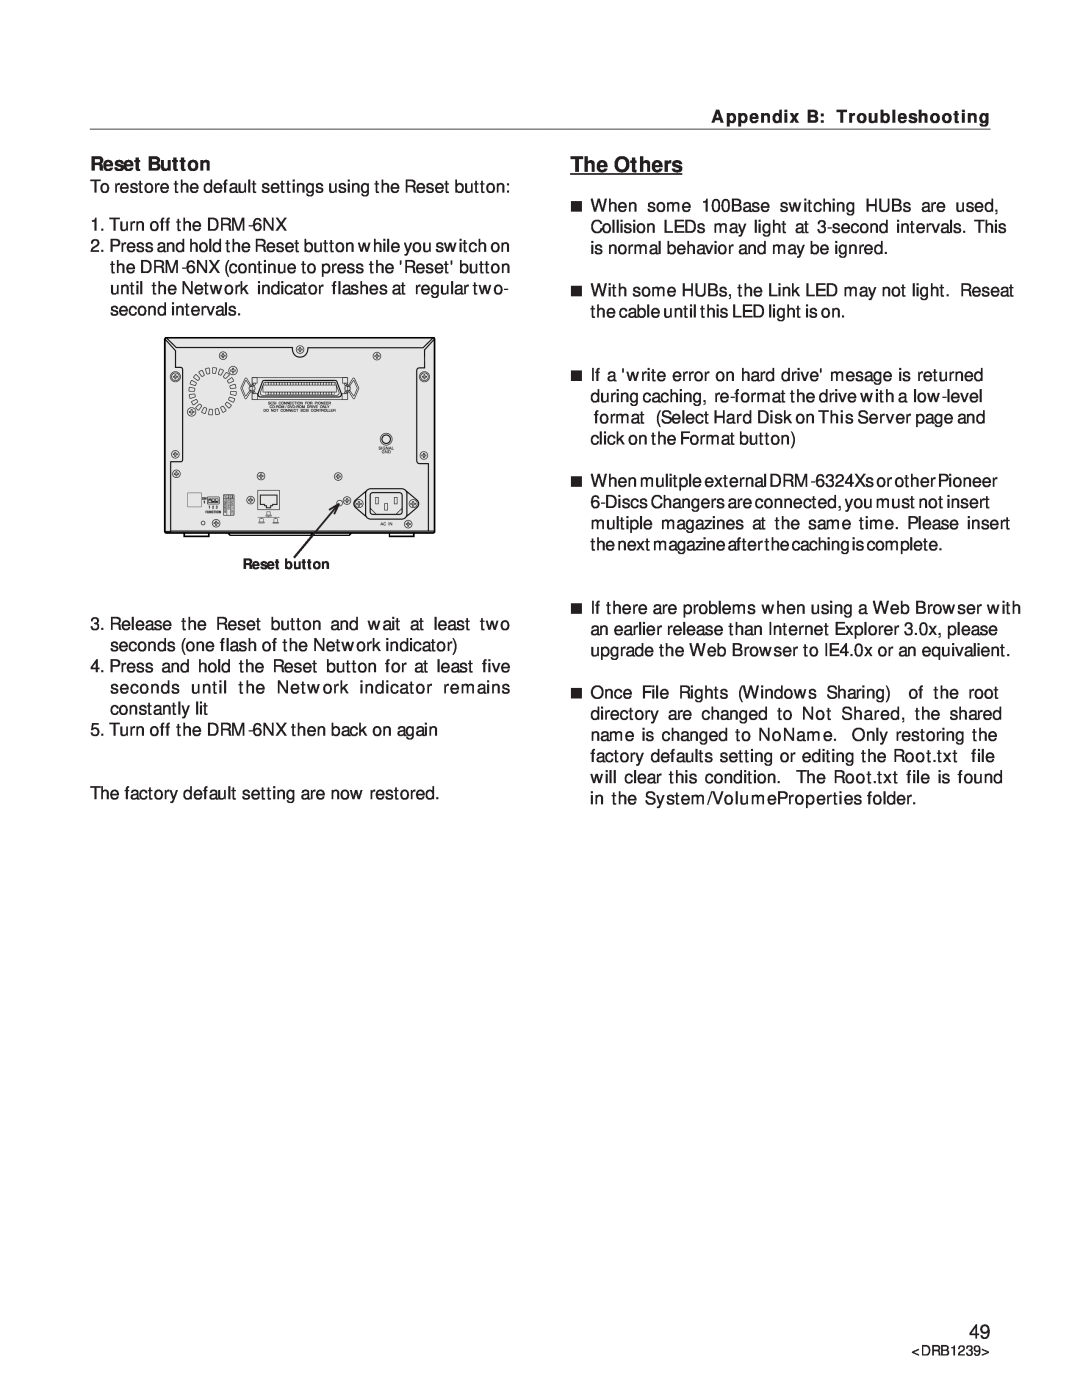 Pioneer DRM-6NX manual The Others, Reset Button, Appendix B Troubleshooting 